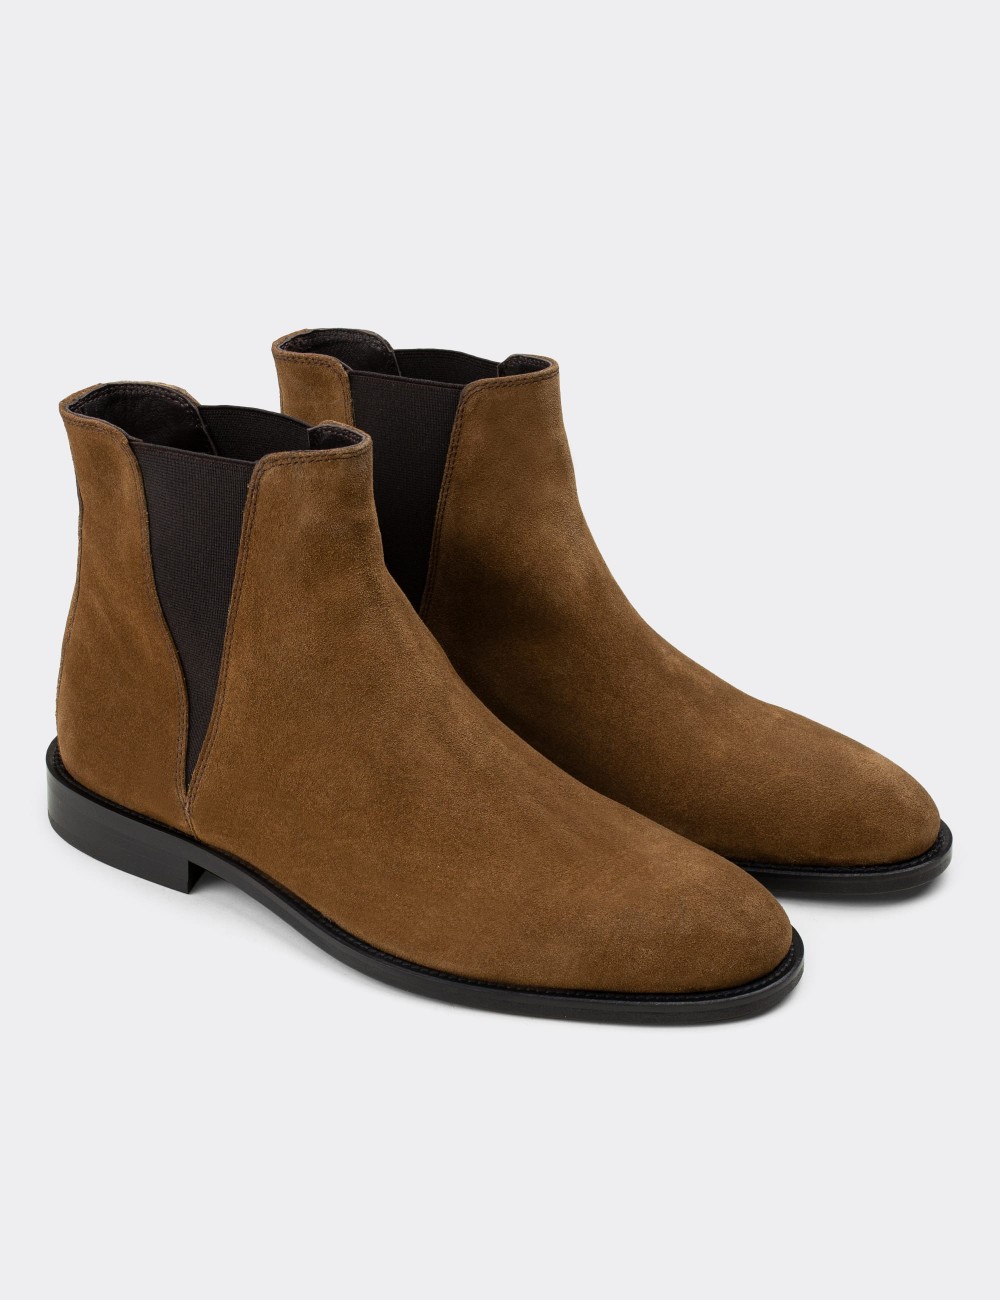 Tan Suede Leather Chelsea Boots - 01689MTBAM02